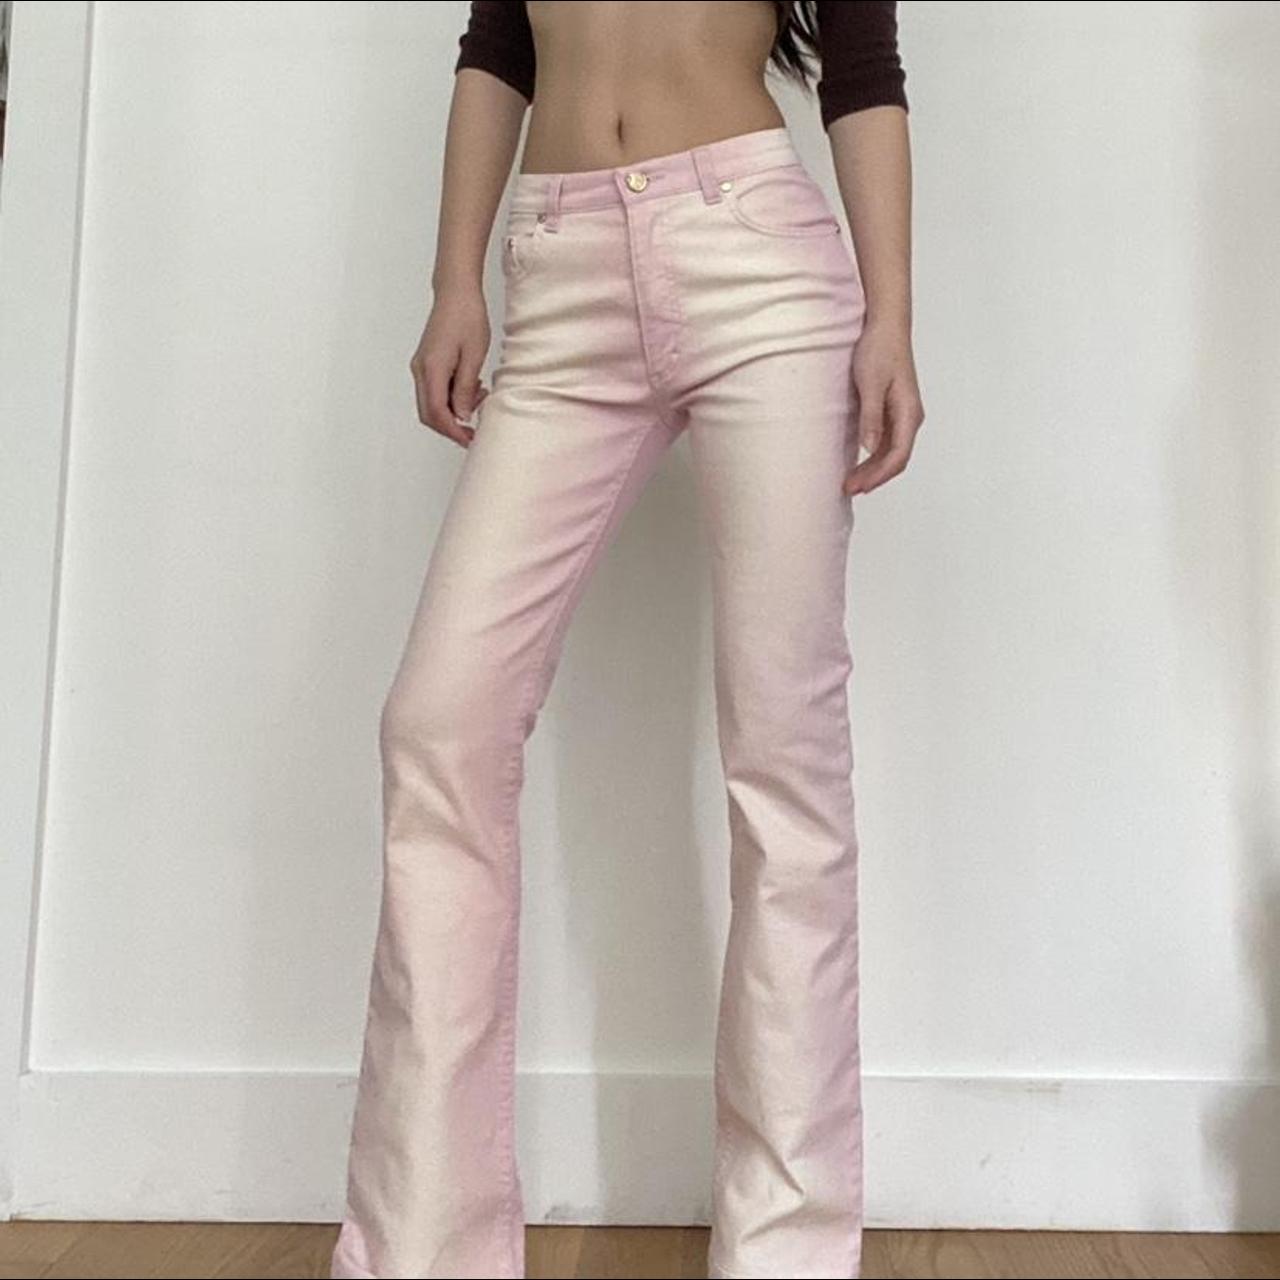 Roberto Cavalli Women's Pink and White Trousers | Depop